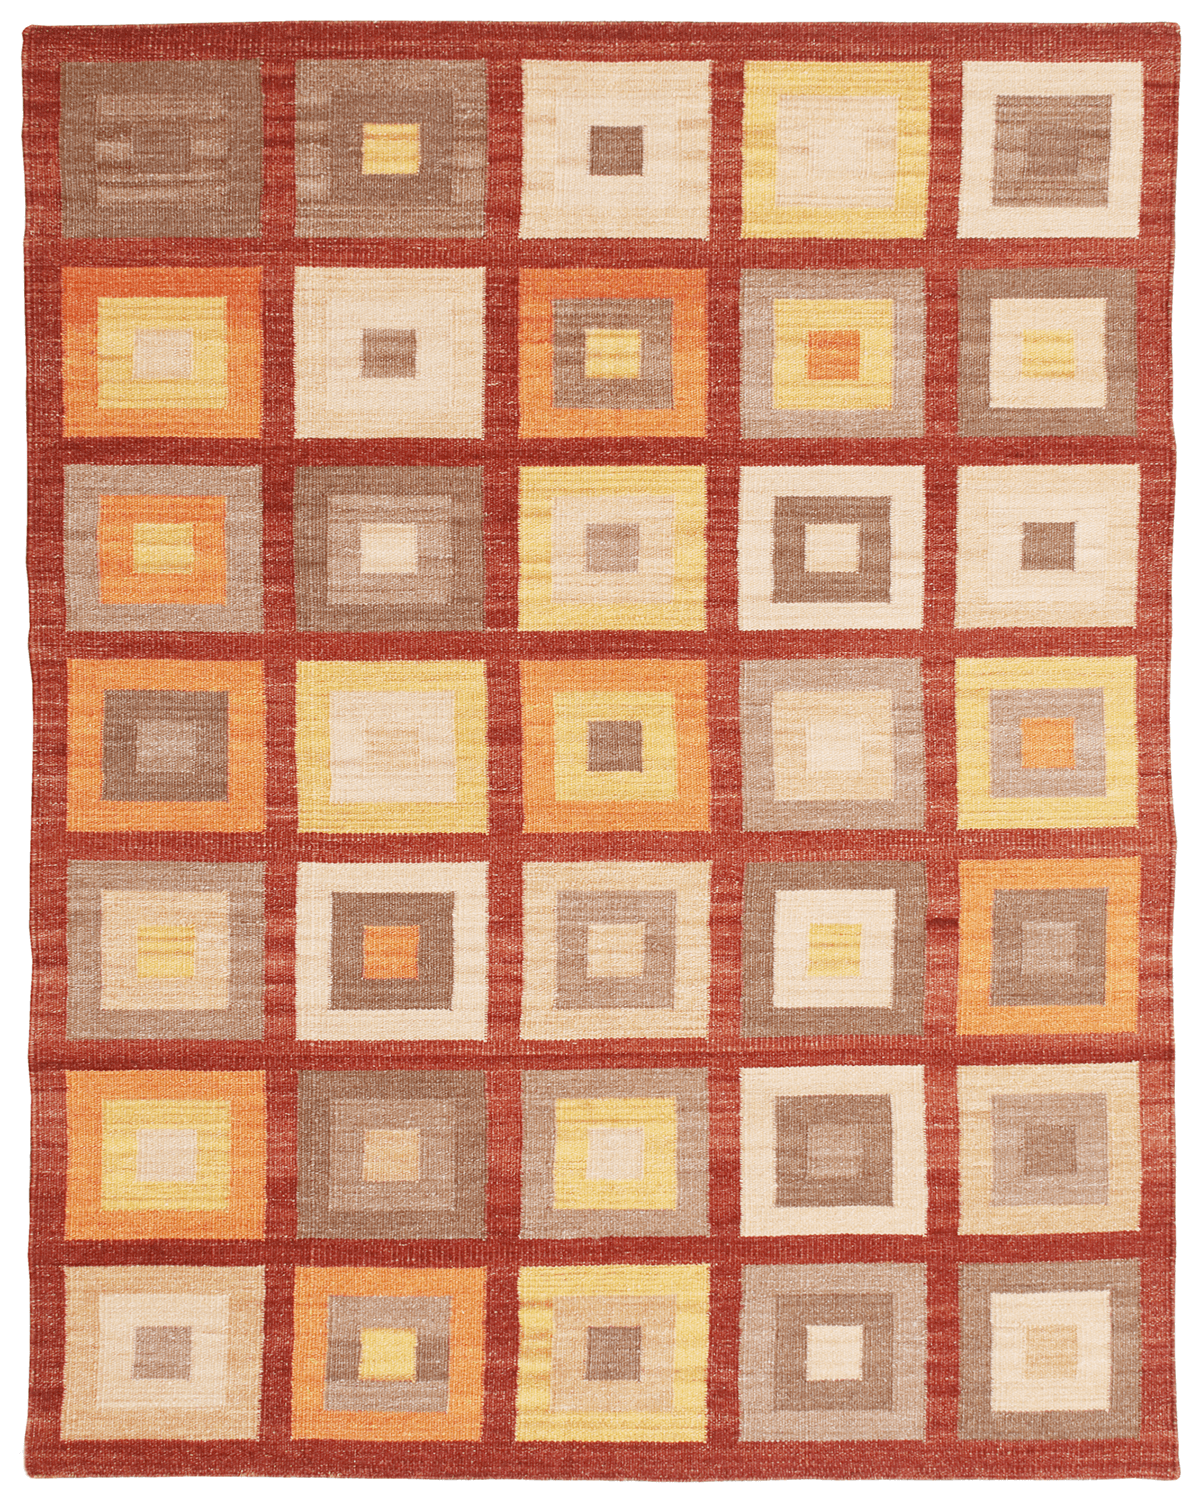 Modern Hand-crafted Rug (Cubic Red)